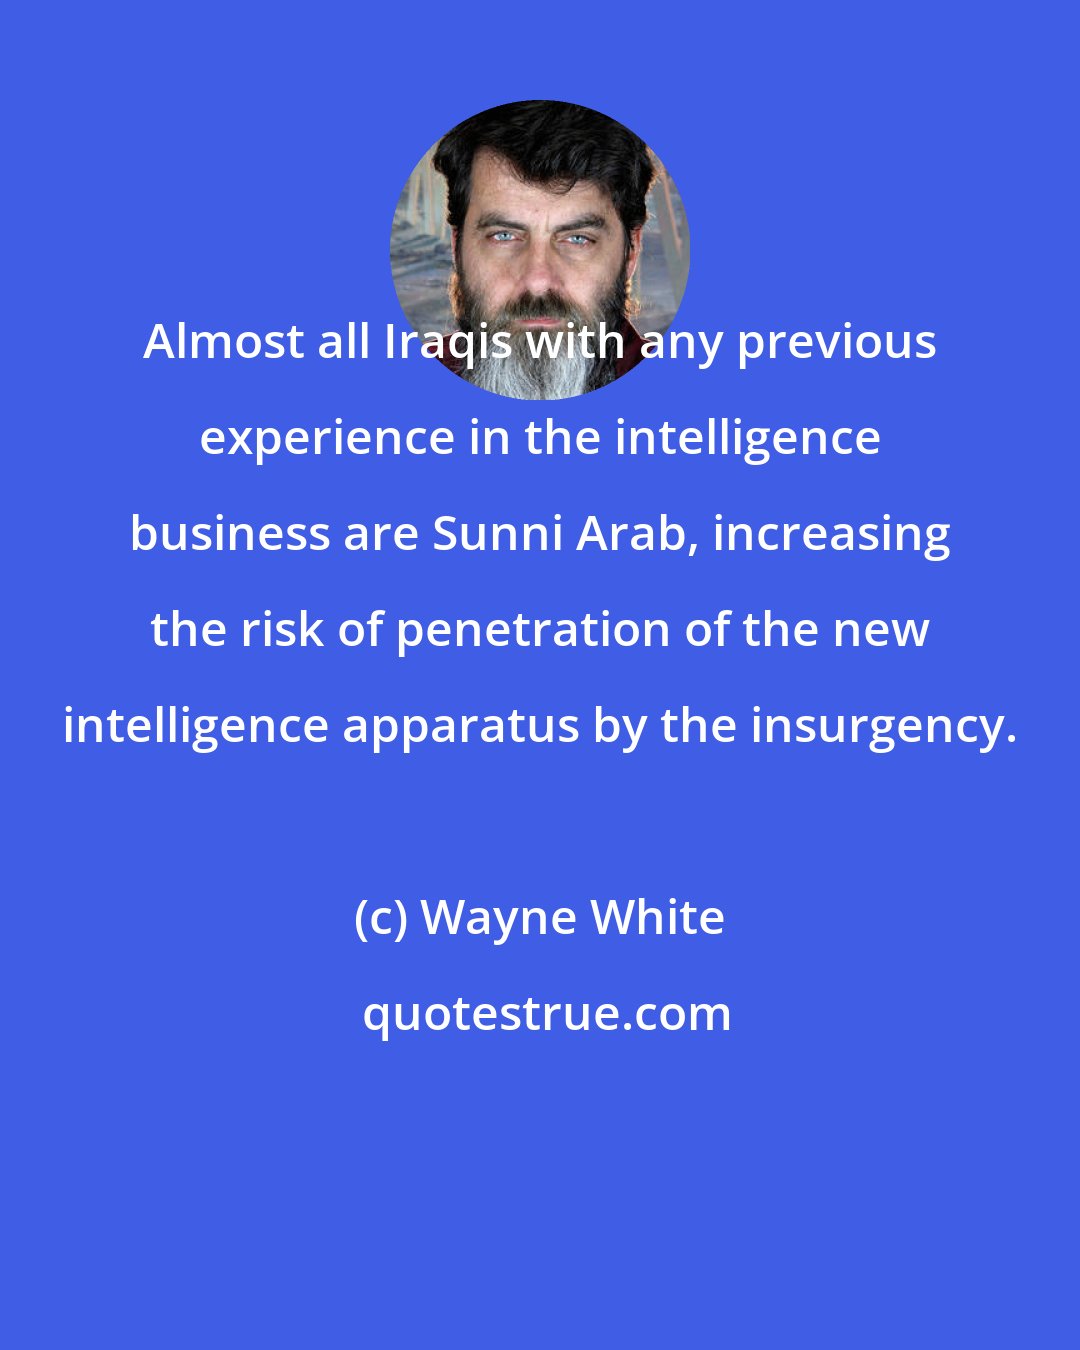 Wayne White: Almost all Iraqis with any previous experience in the intelligence business are Sunni Arab, increasing the risk of penetration of the new intelligence apparatus by the insurgency.